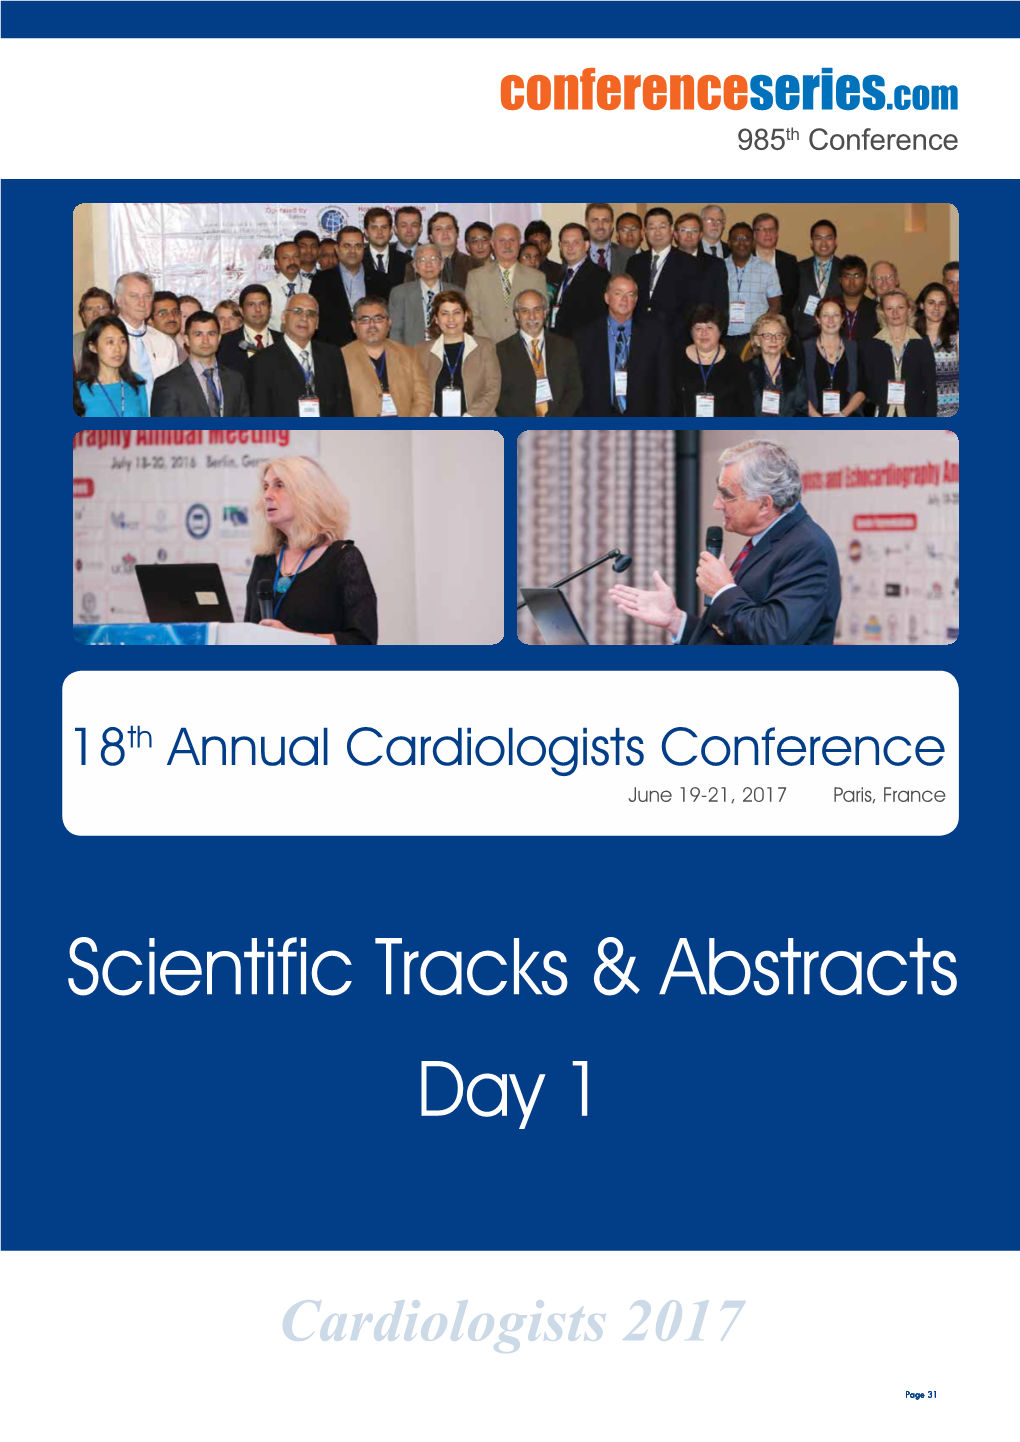 Scientific Tracks & Abstracts